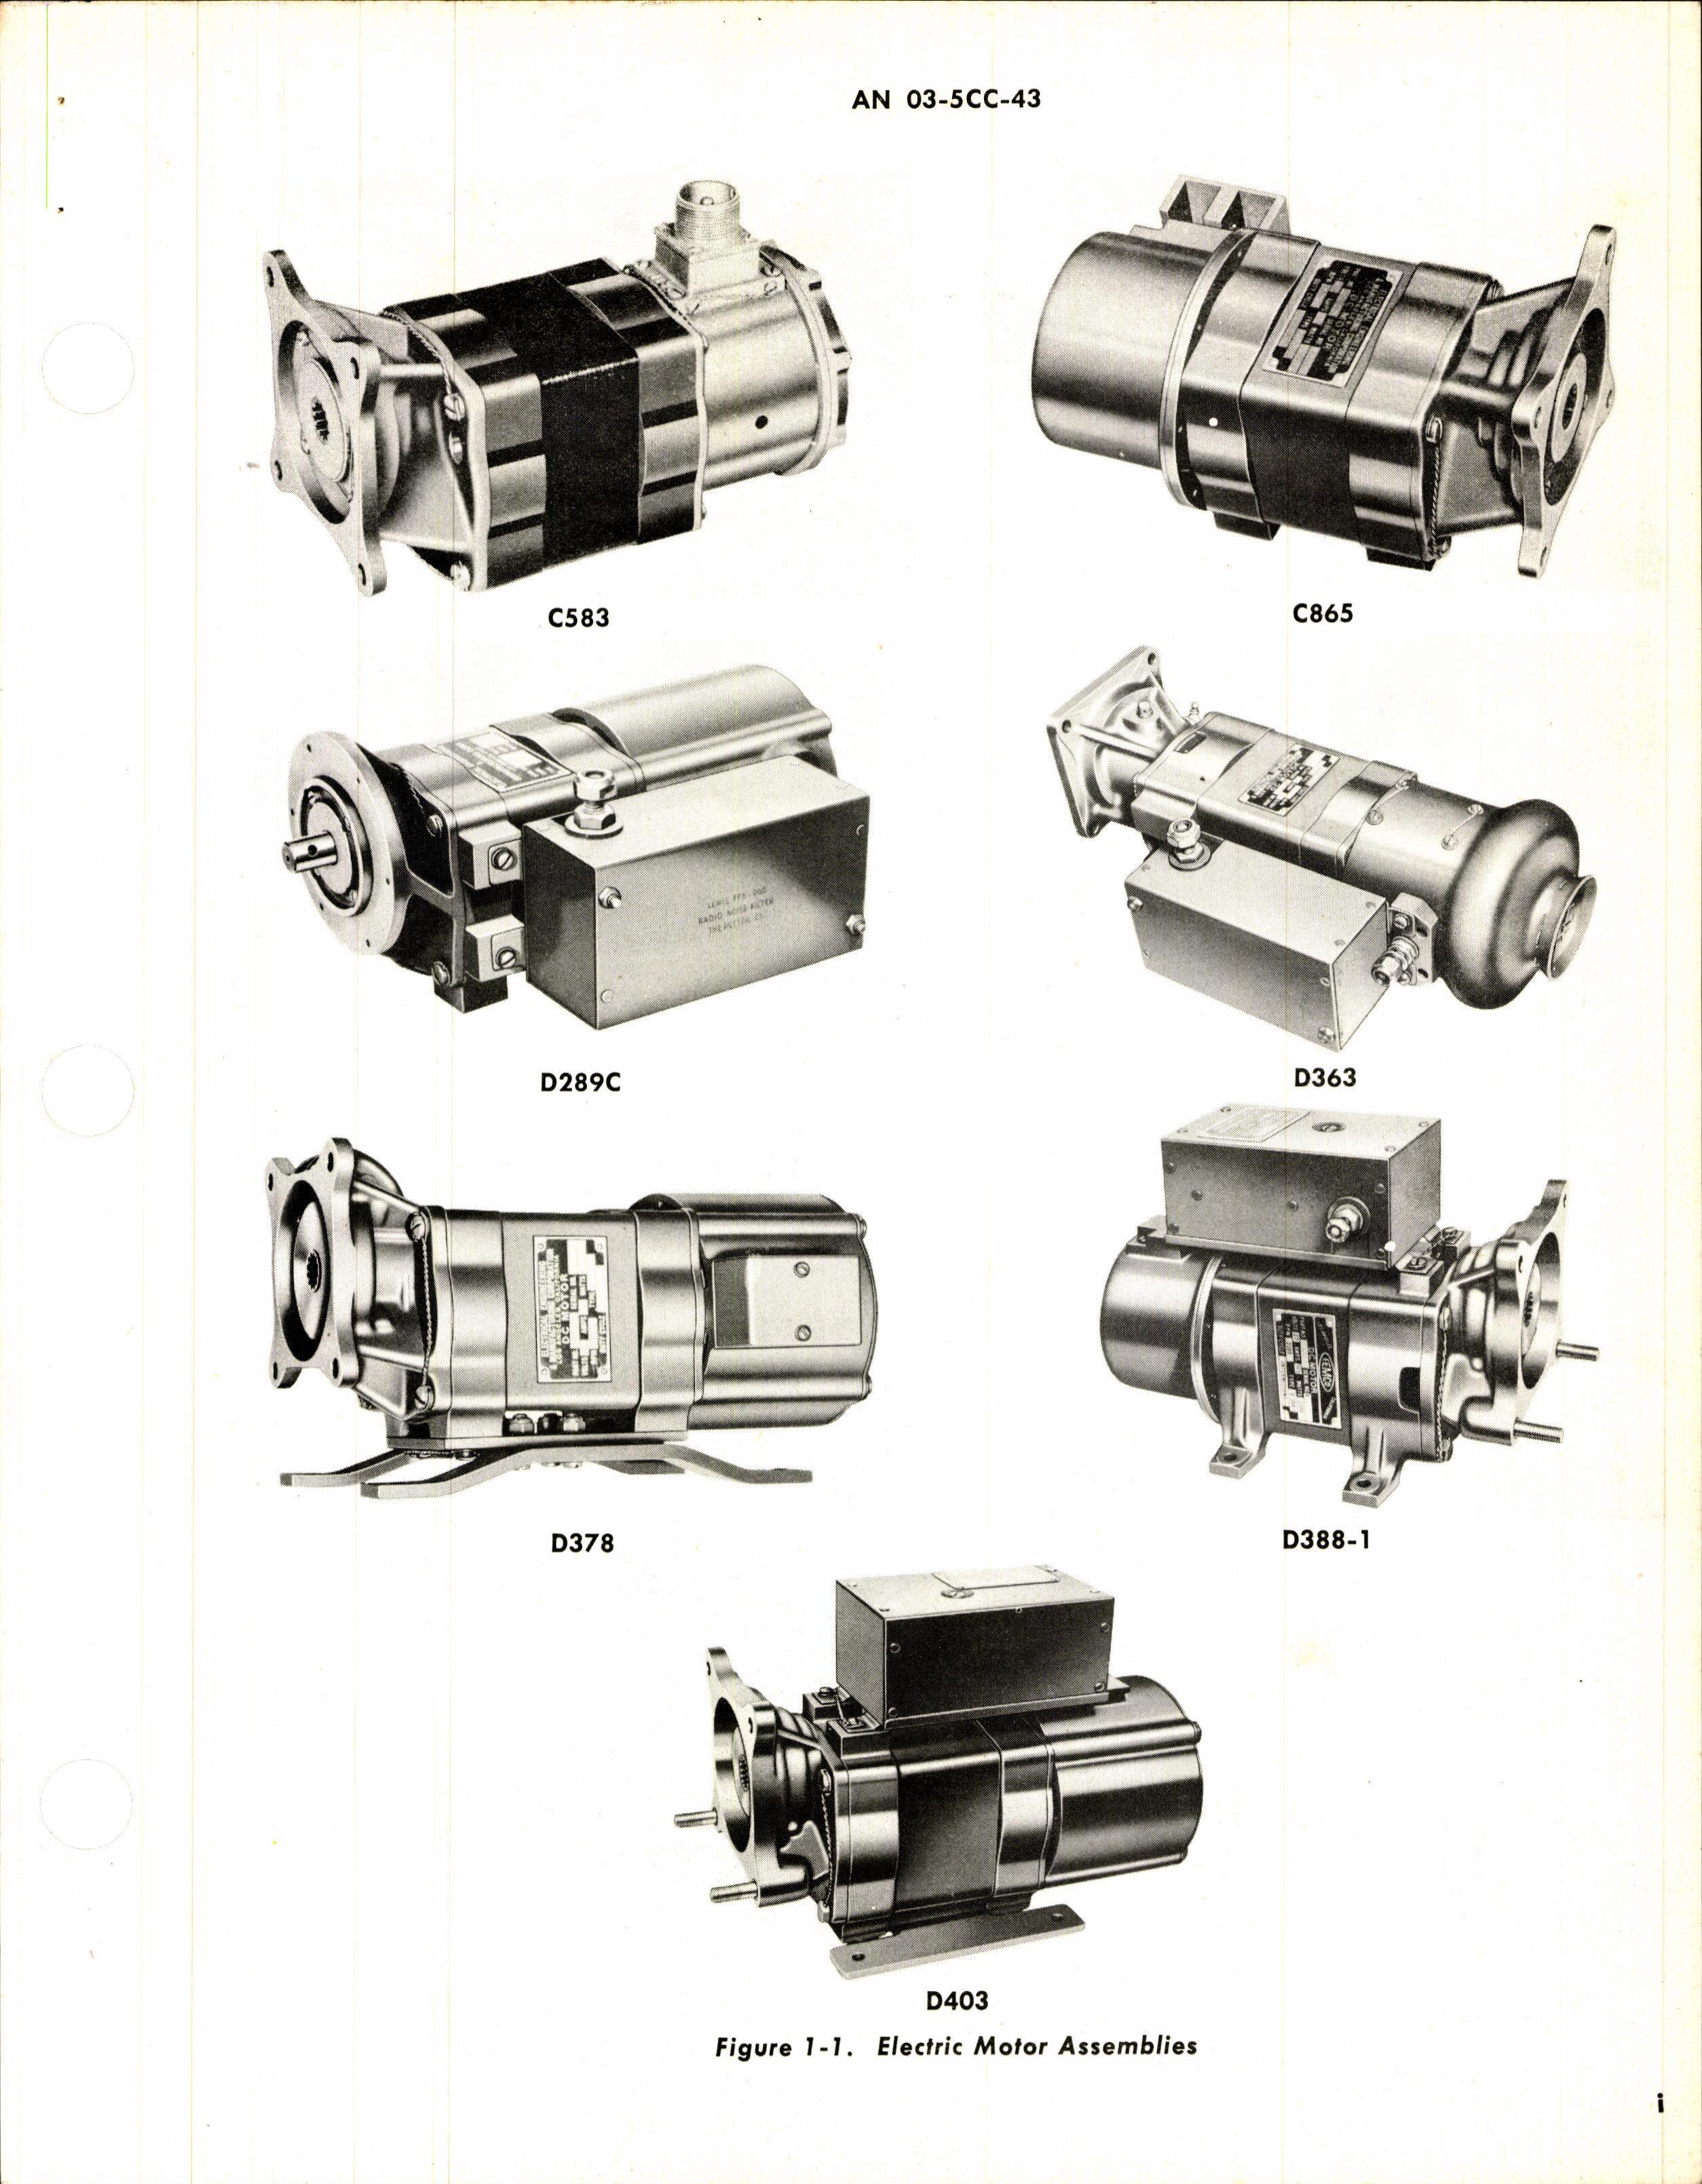 Sample page 3 from AirCorps Library document: Overhaul Instructions for Electrical Engineering & Mfg. Co. Electric Motors